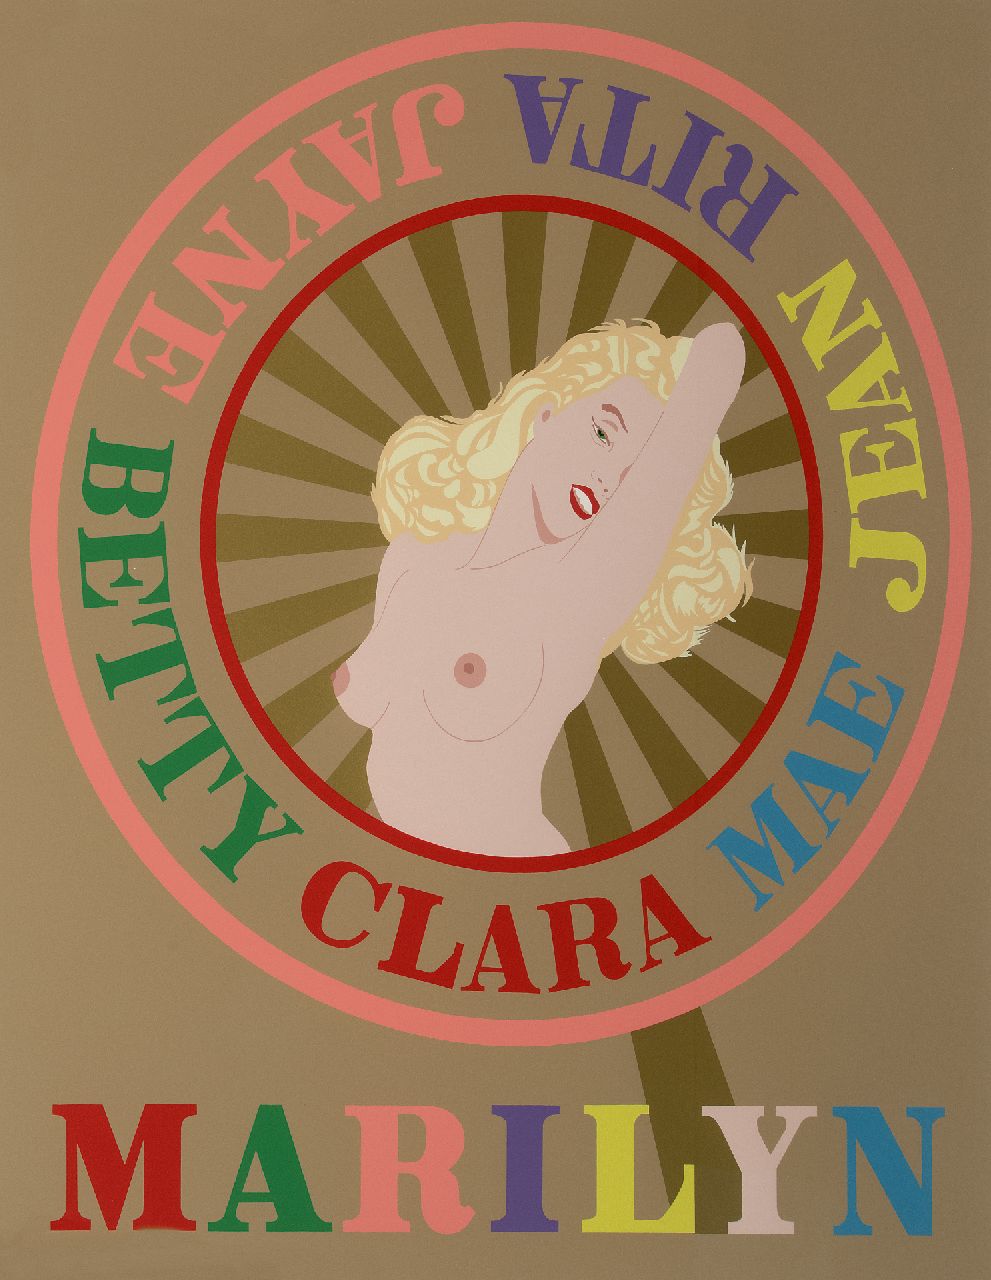 Robert Clark | Sunburst Marilyn (Homage to Marilyn Monroe), screenprint on paper, 85.0 x 71.5 cm, signed l.r. (in pencil) and dated 2001 (in pencil)